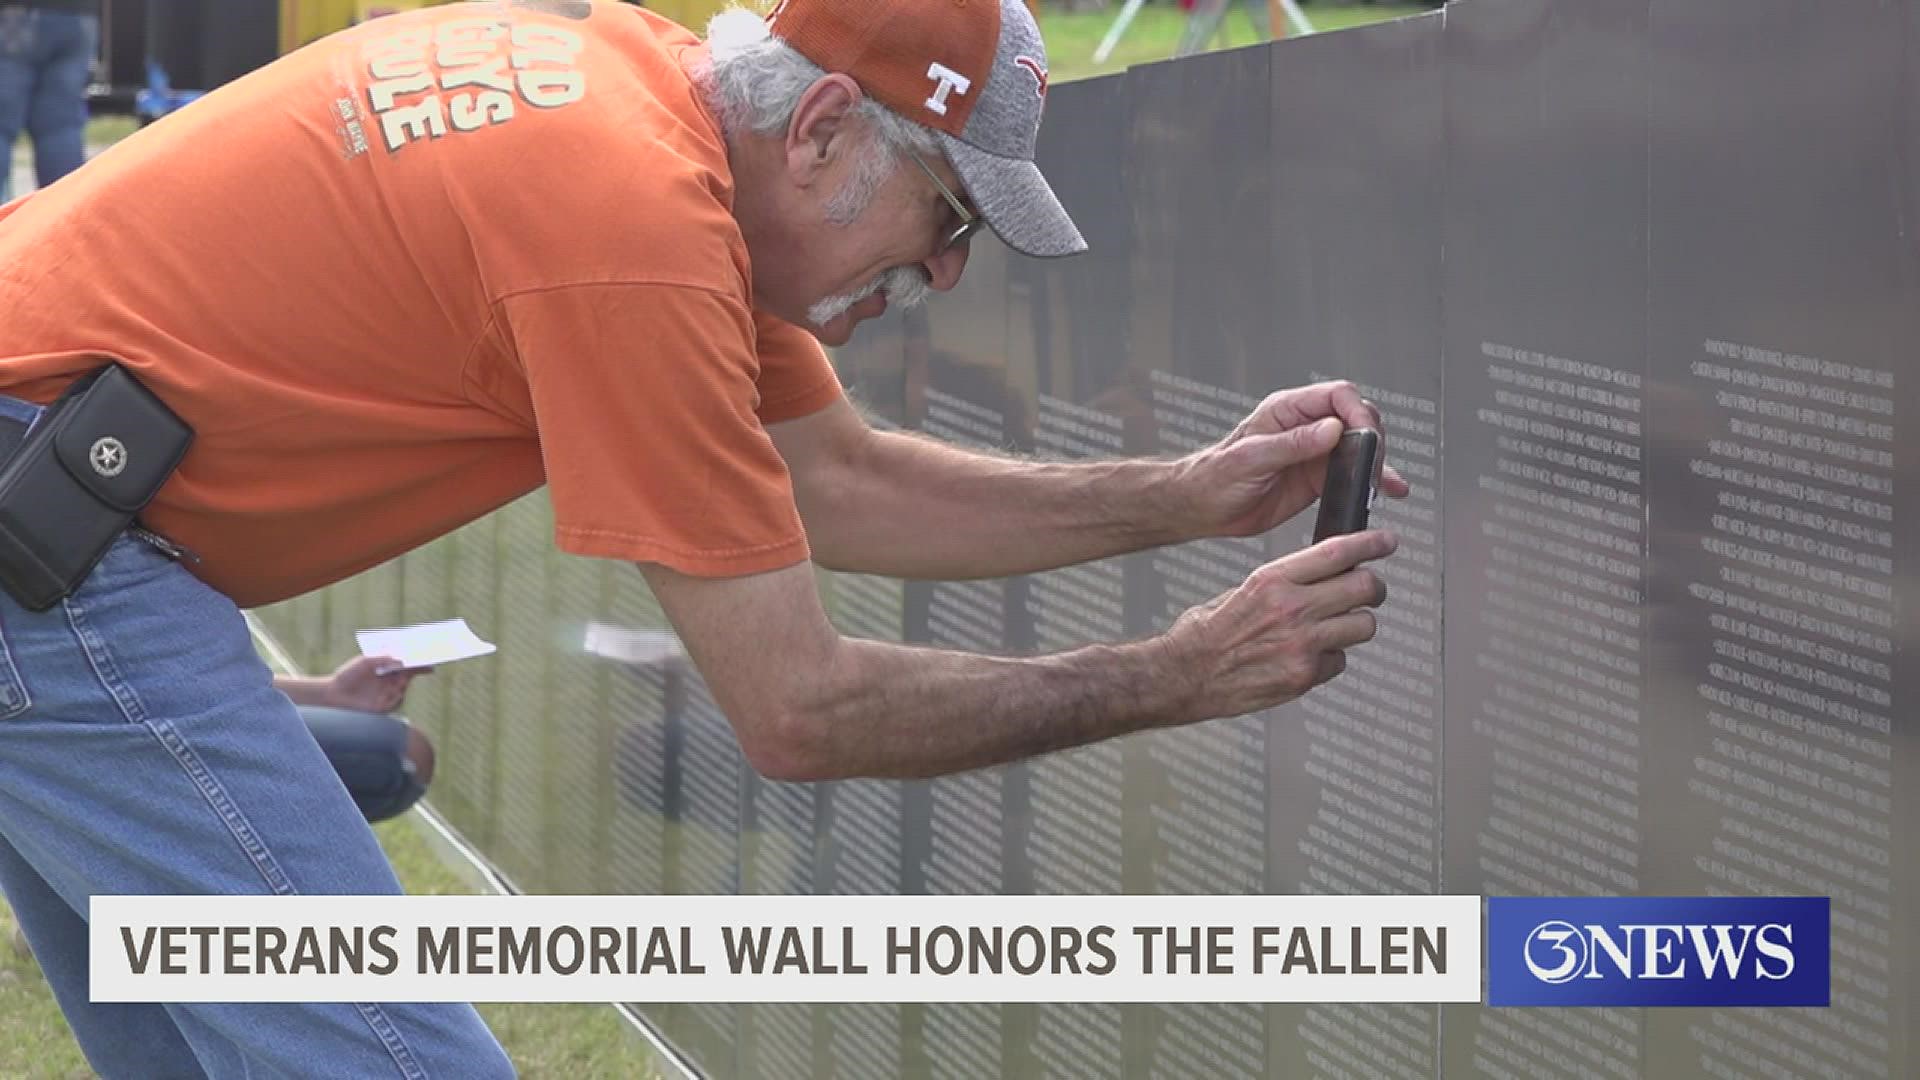 A number of people came out for the opening ceremony Thursday to view the wall of honor, to reflect and to grieve.